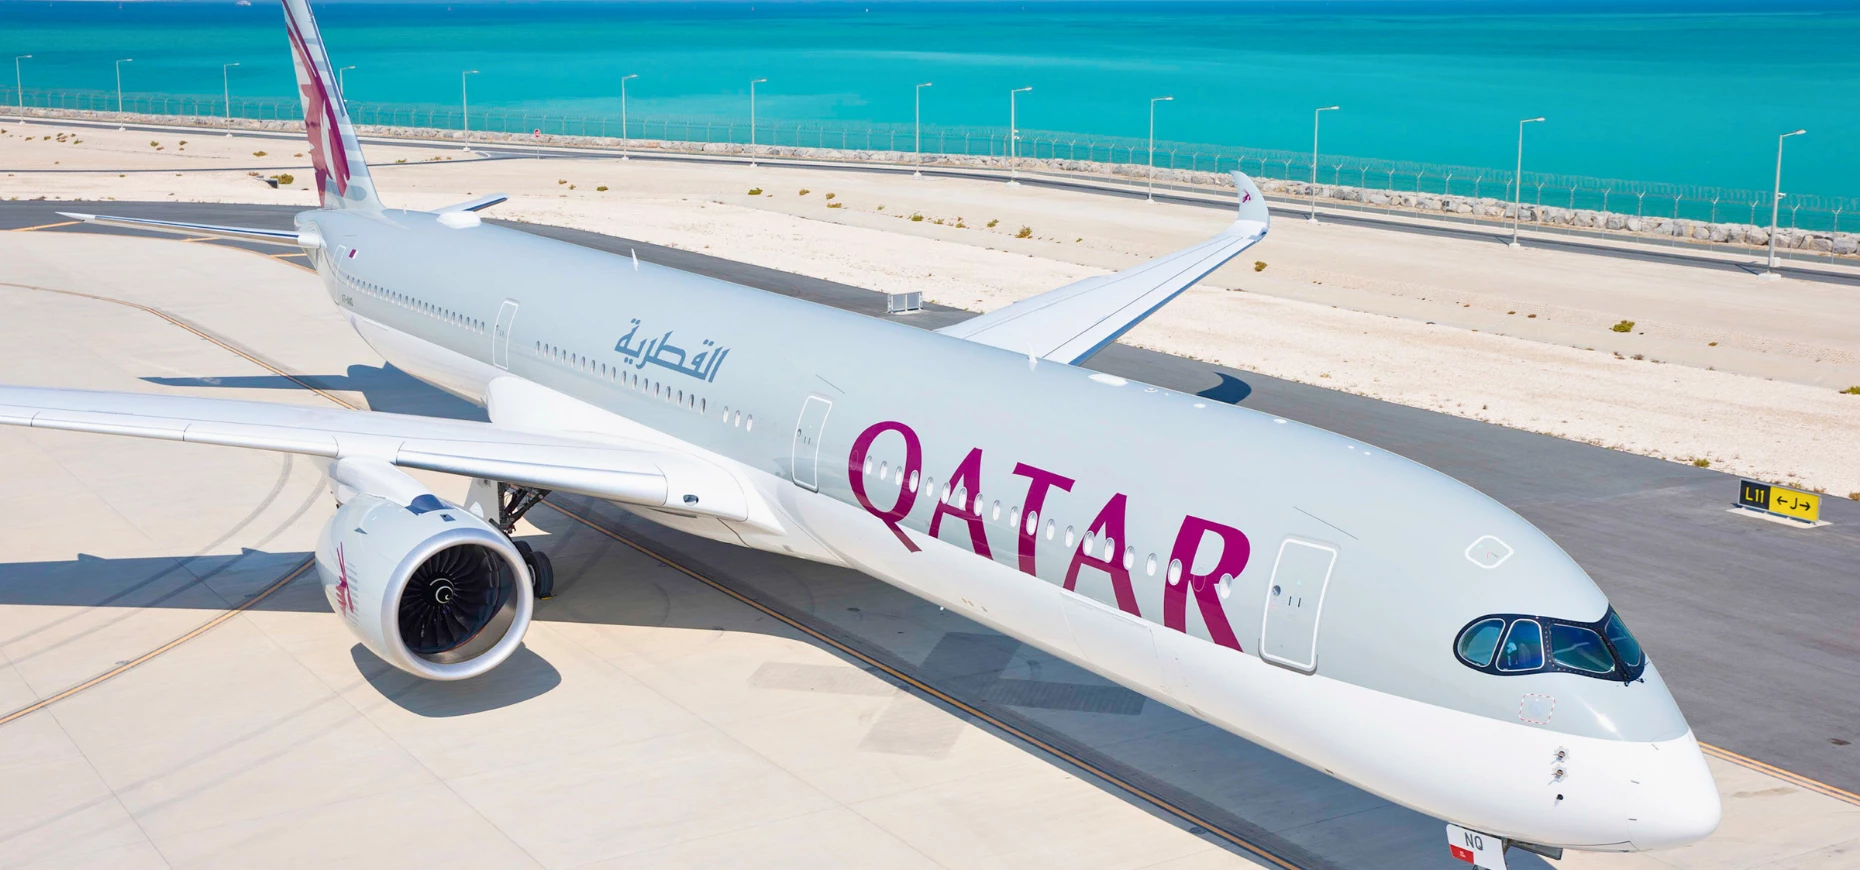 A Qatar Airways aircraft sits on a runway in front of the ocean.